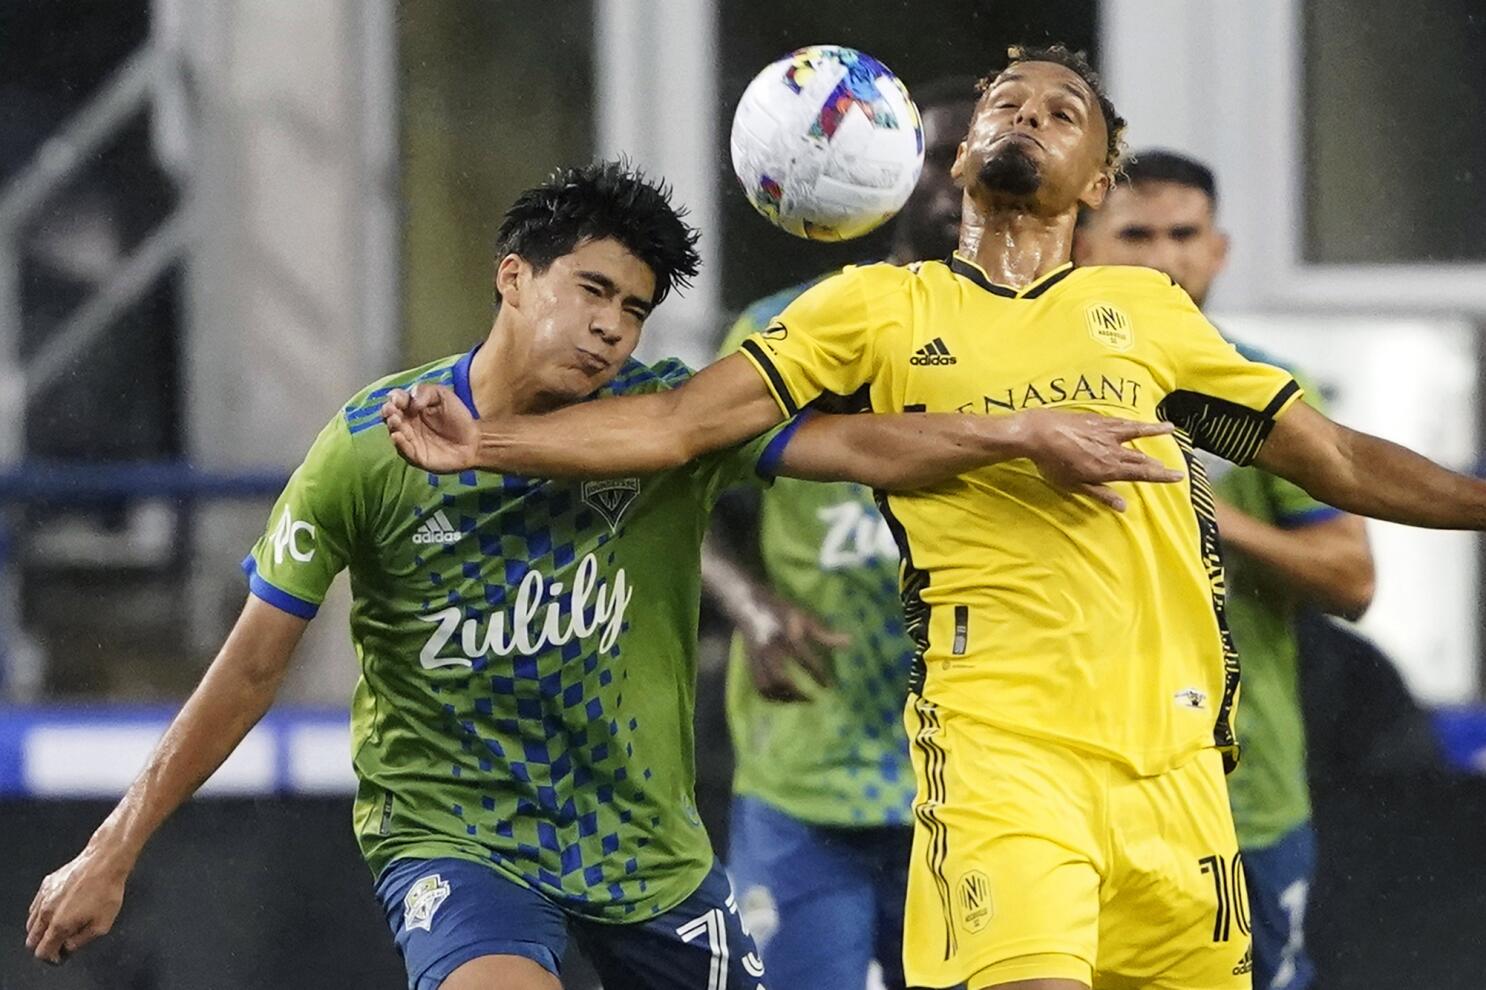 Nashville SC didn't win its first game at the brand-new stadium